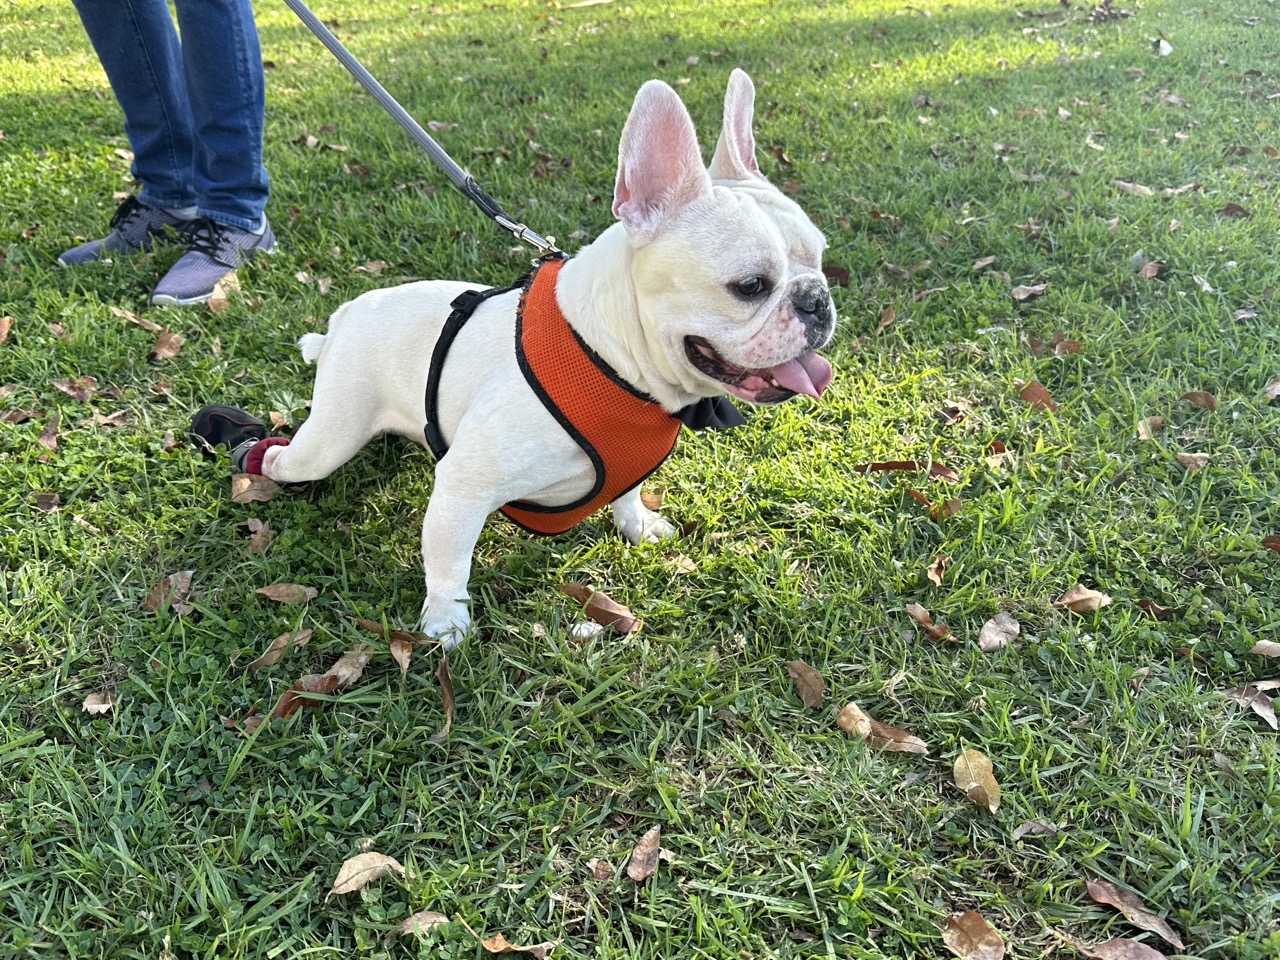 Winston in his red harness